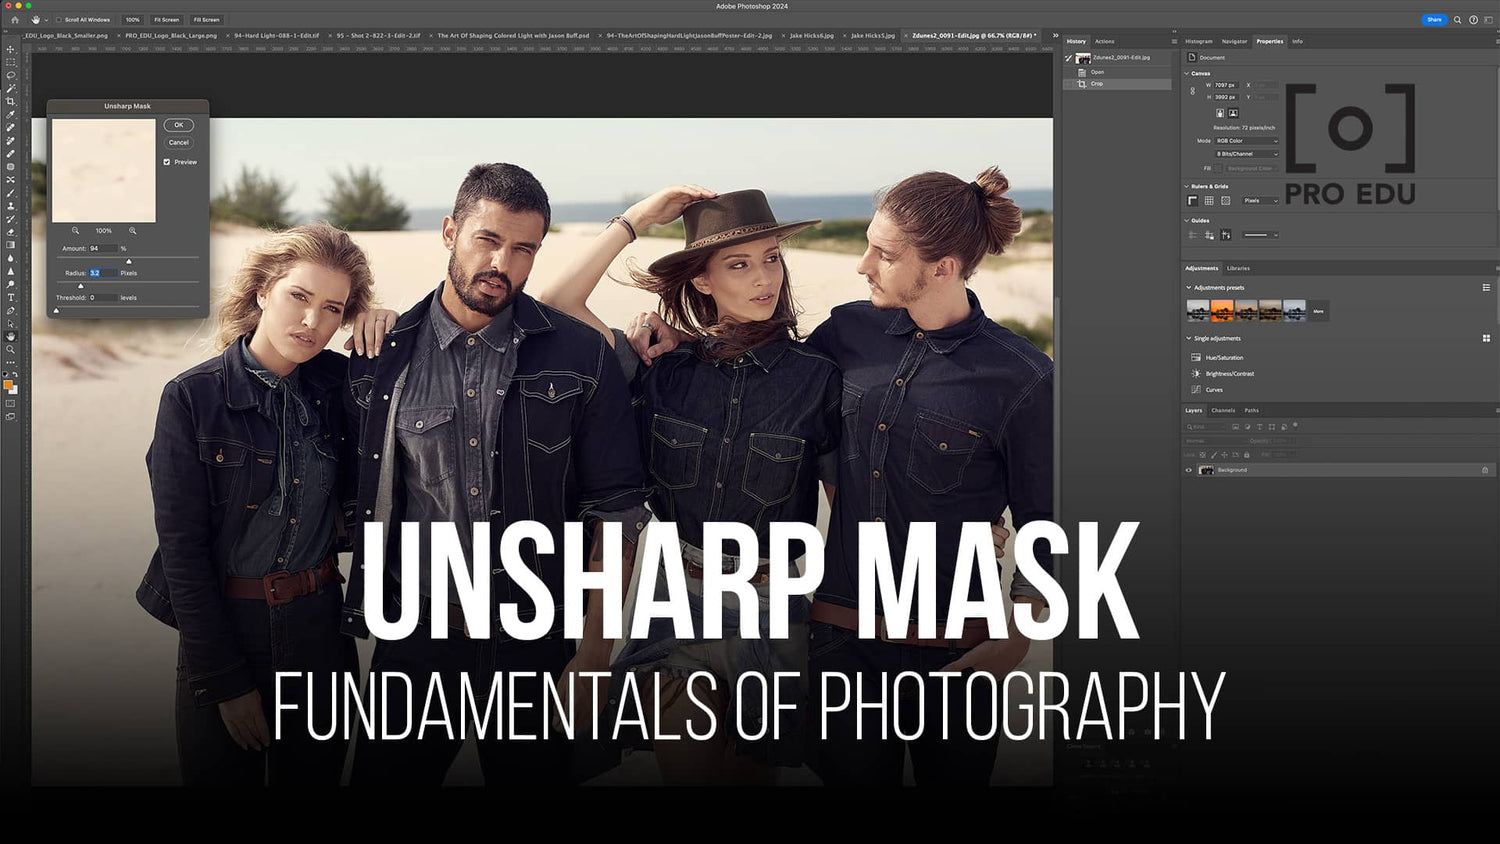 Enhancing image sharpness with unsharp mask in photography